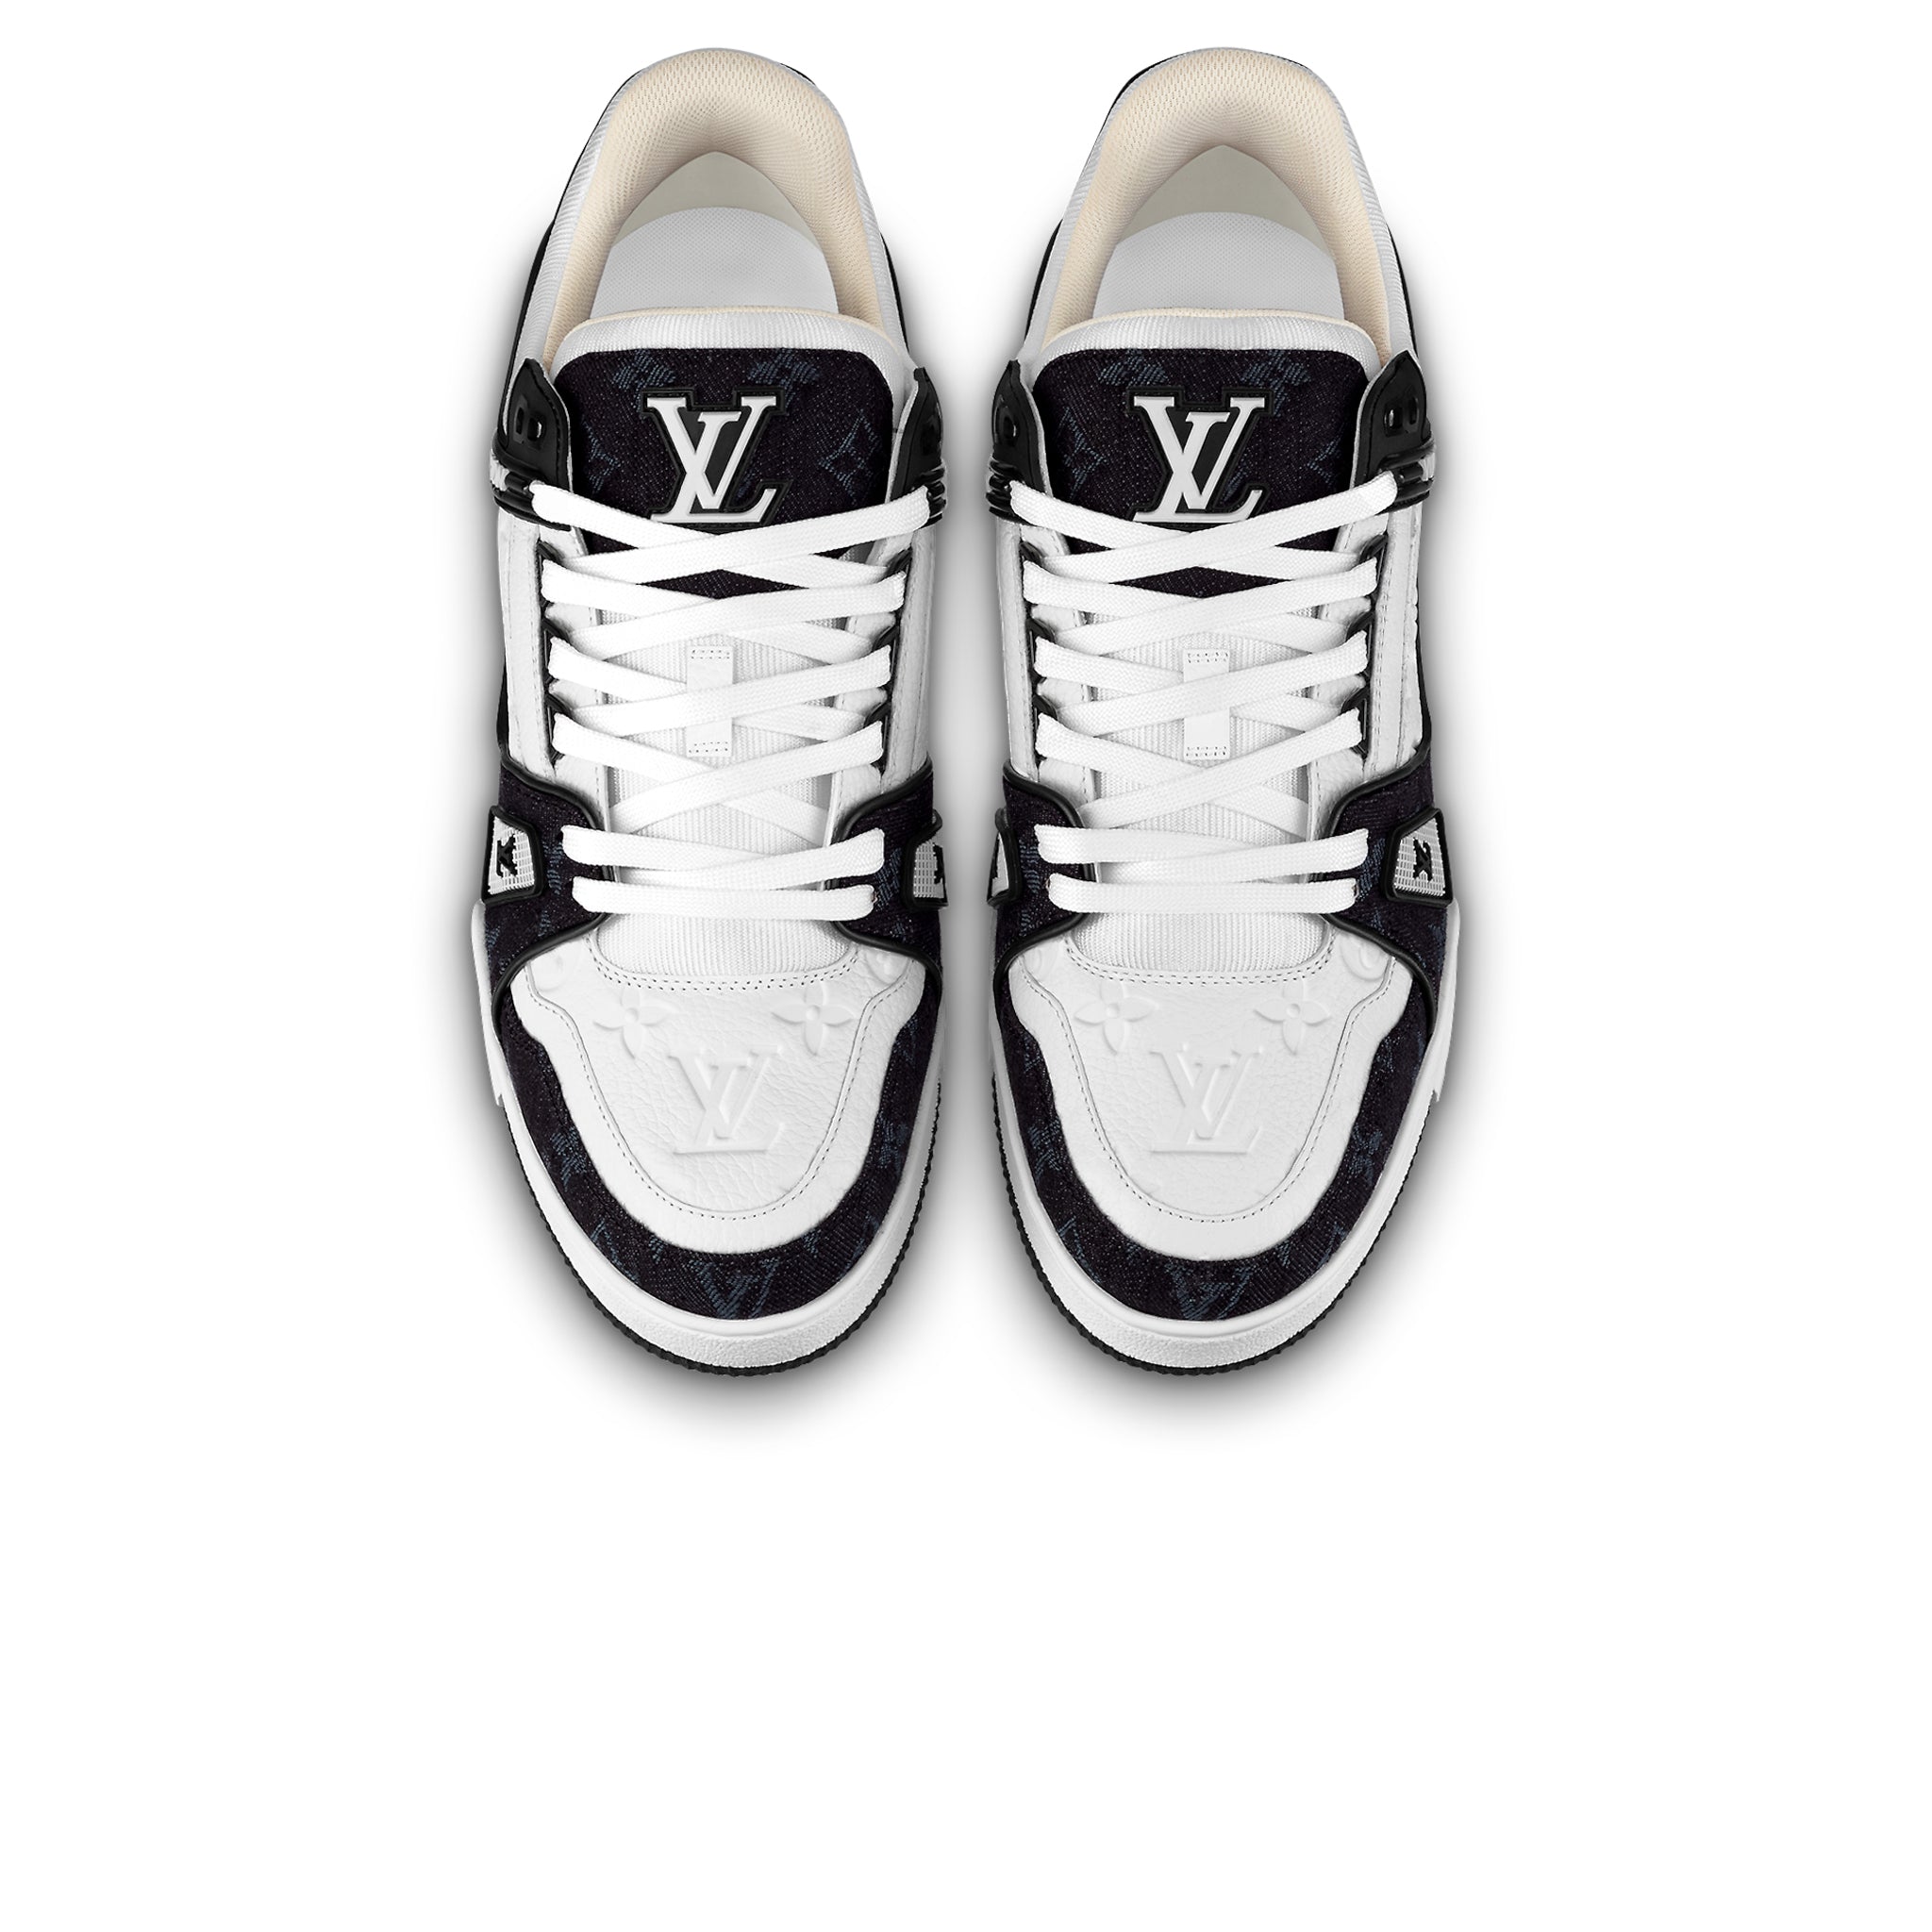 Pre-owned Lv Trainer White Ss21 In White/black/blue